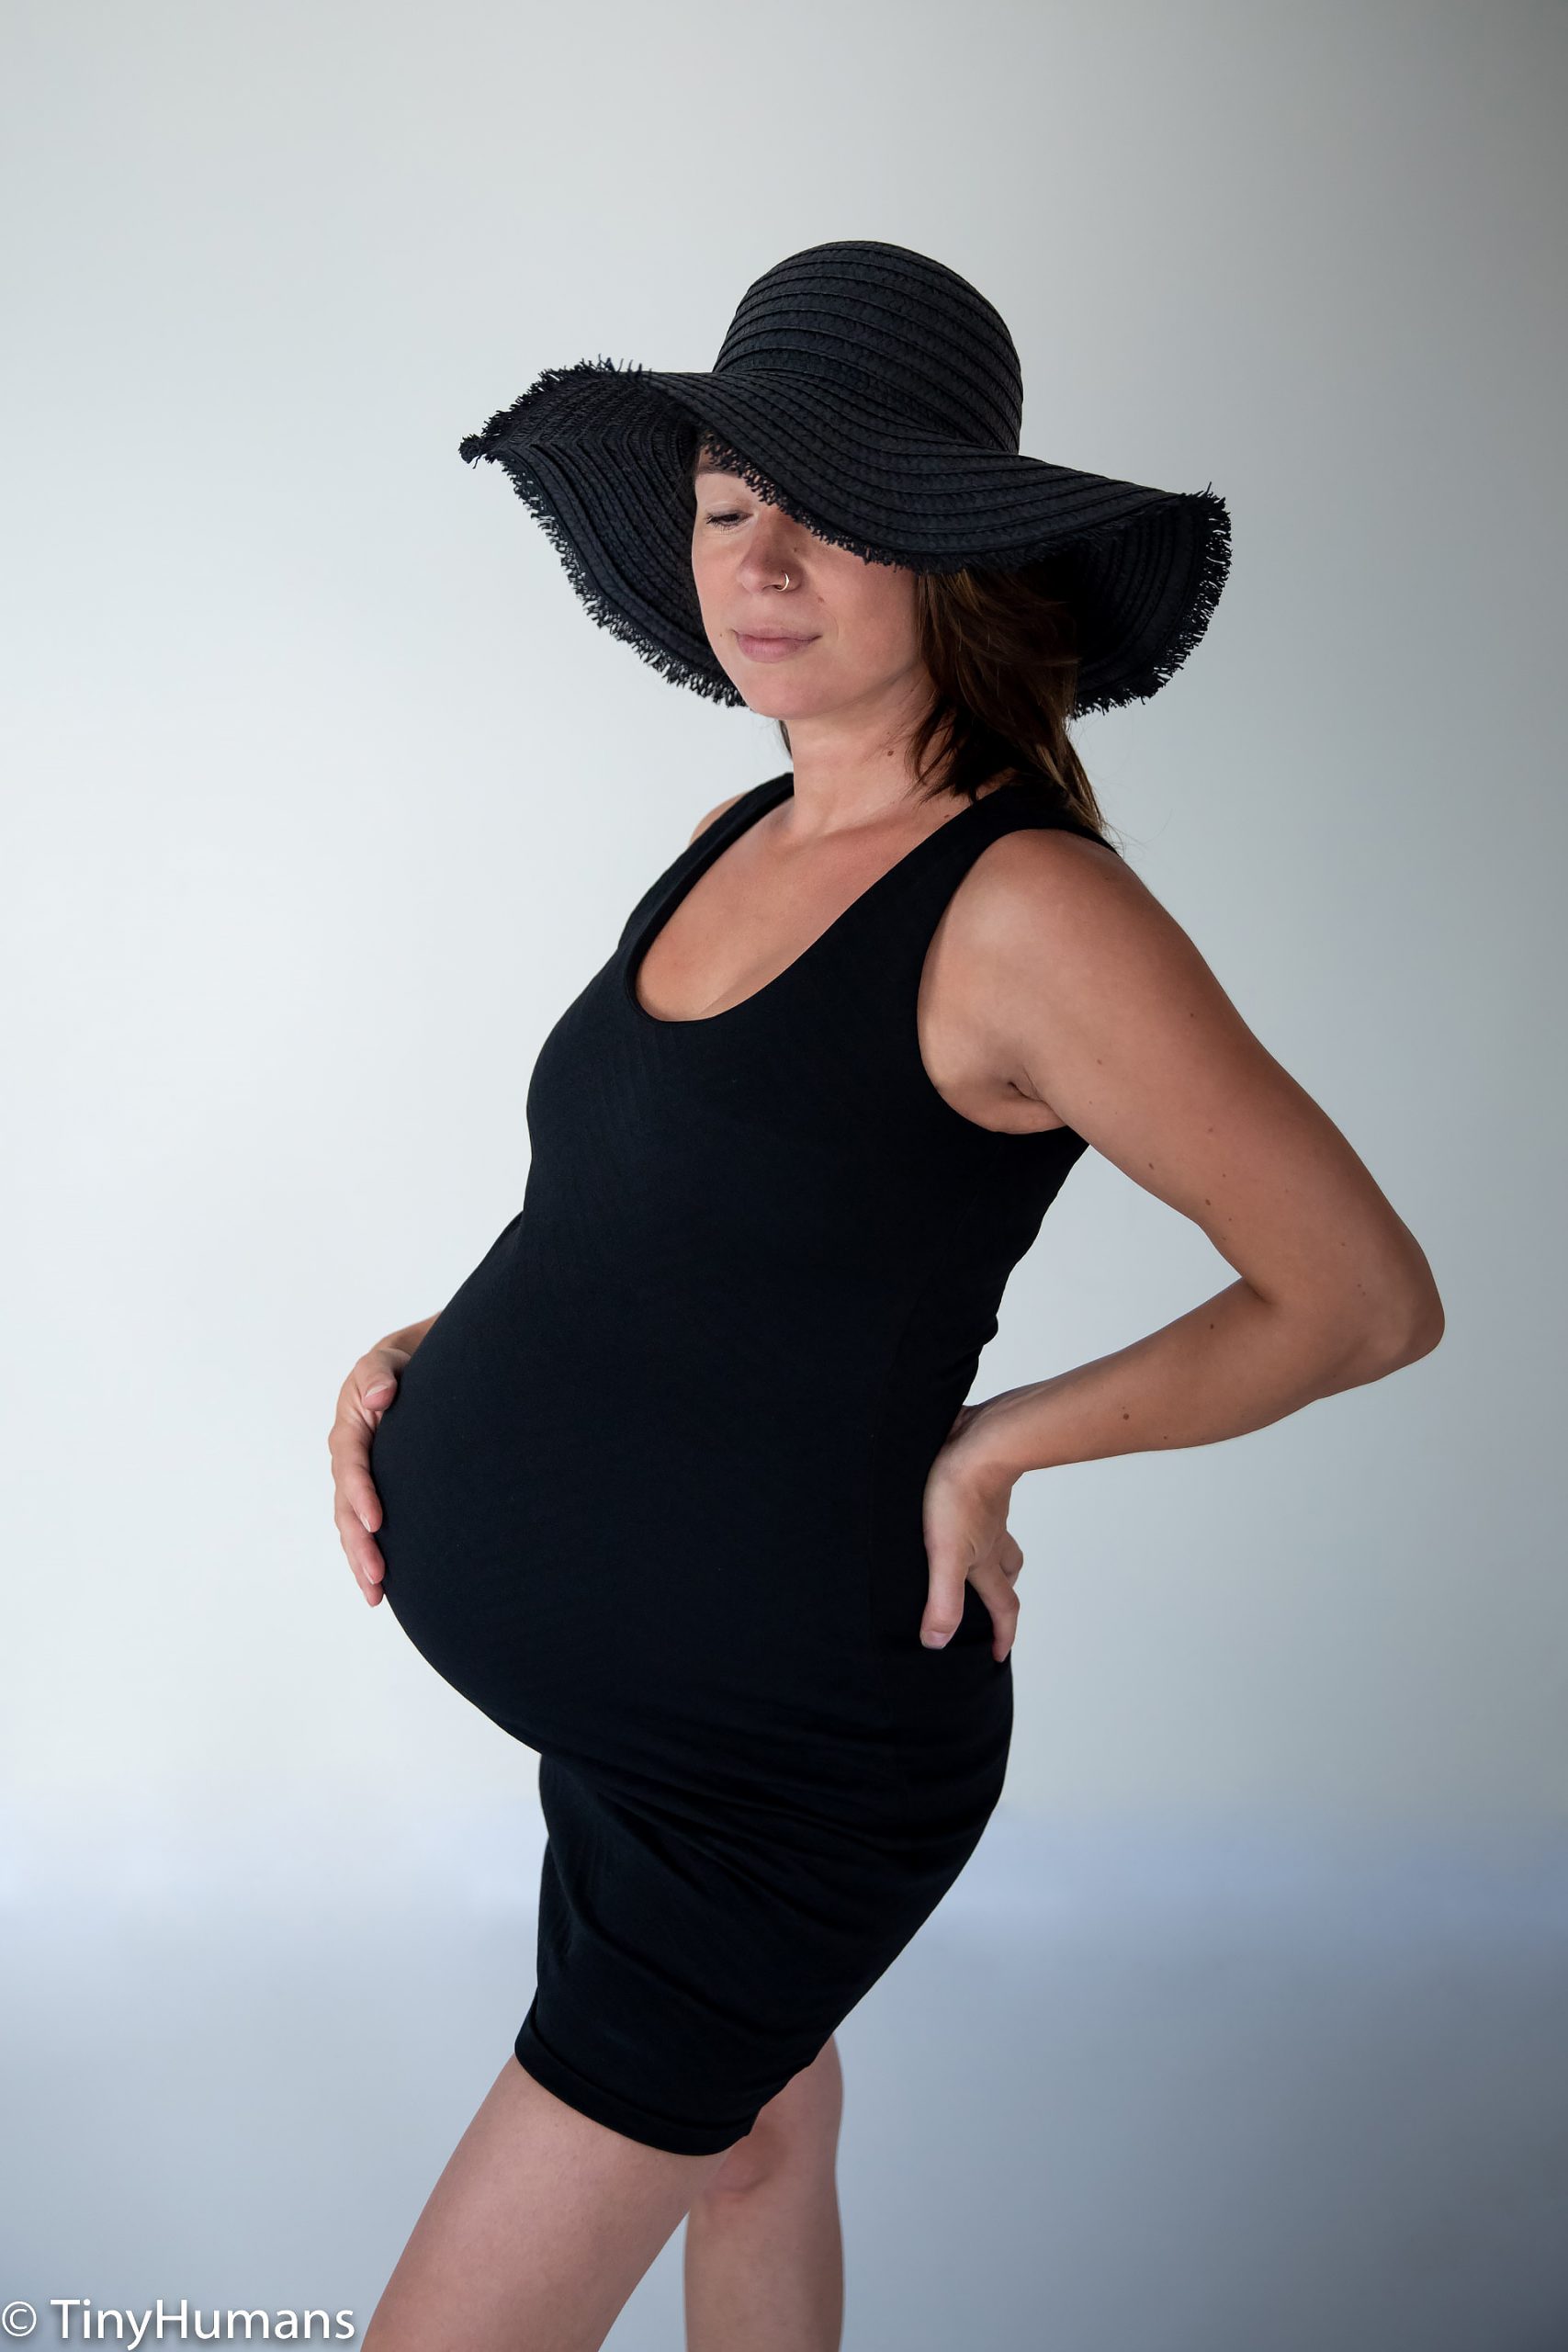 Pregnant woman with a hat